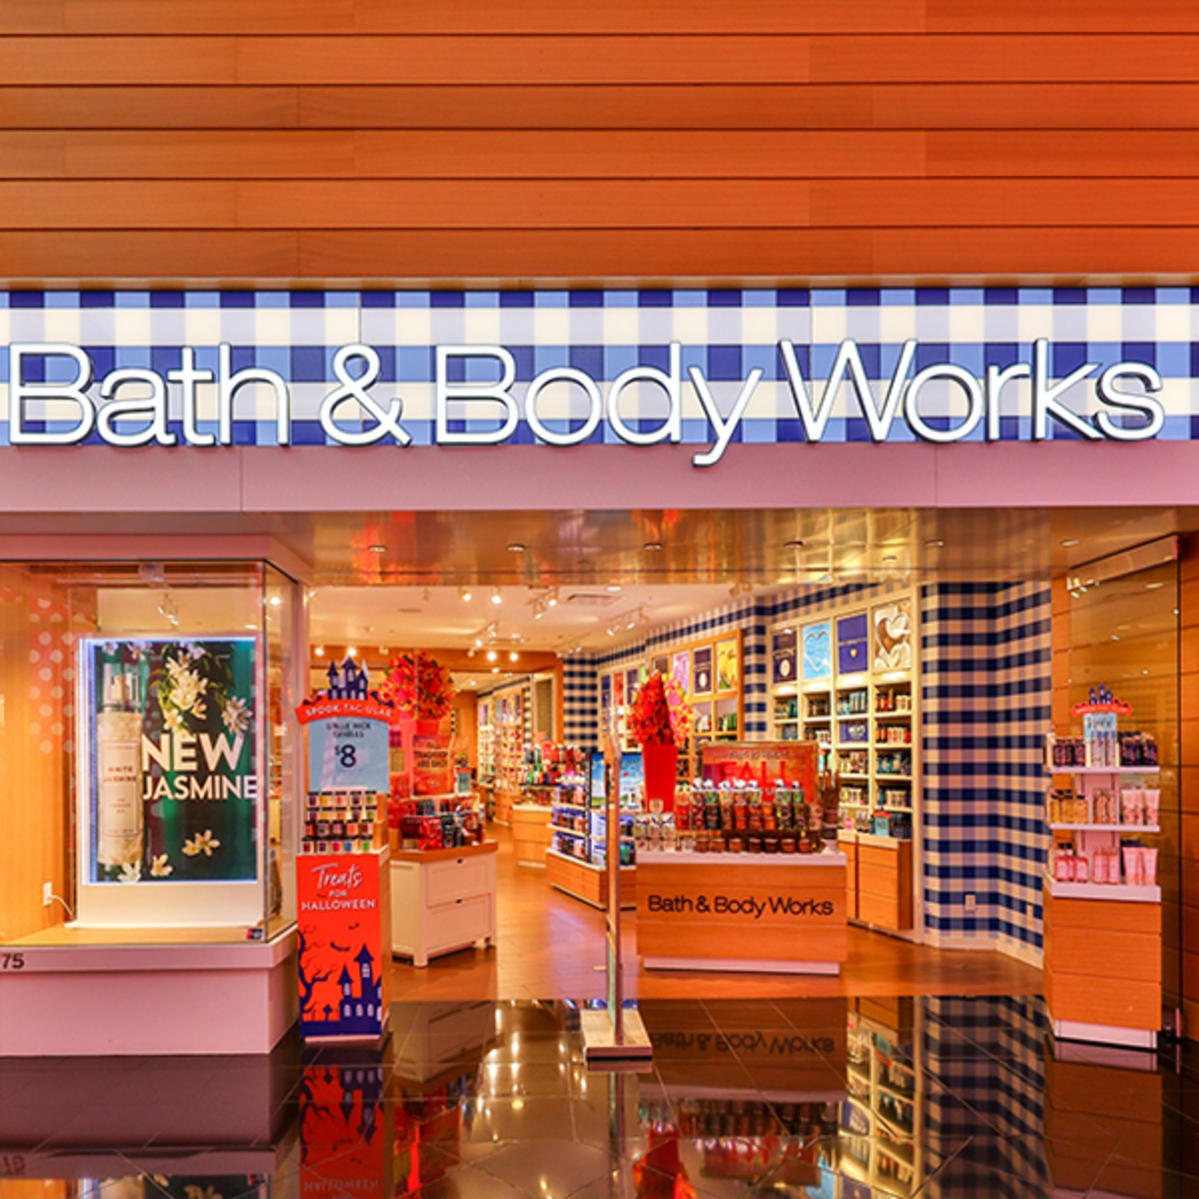 Top 101+ Images bath and body works mall at millenia Sharp